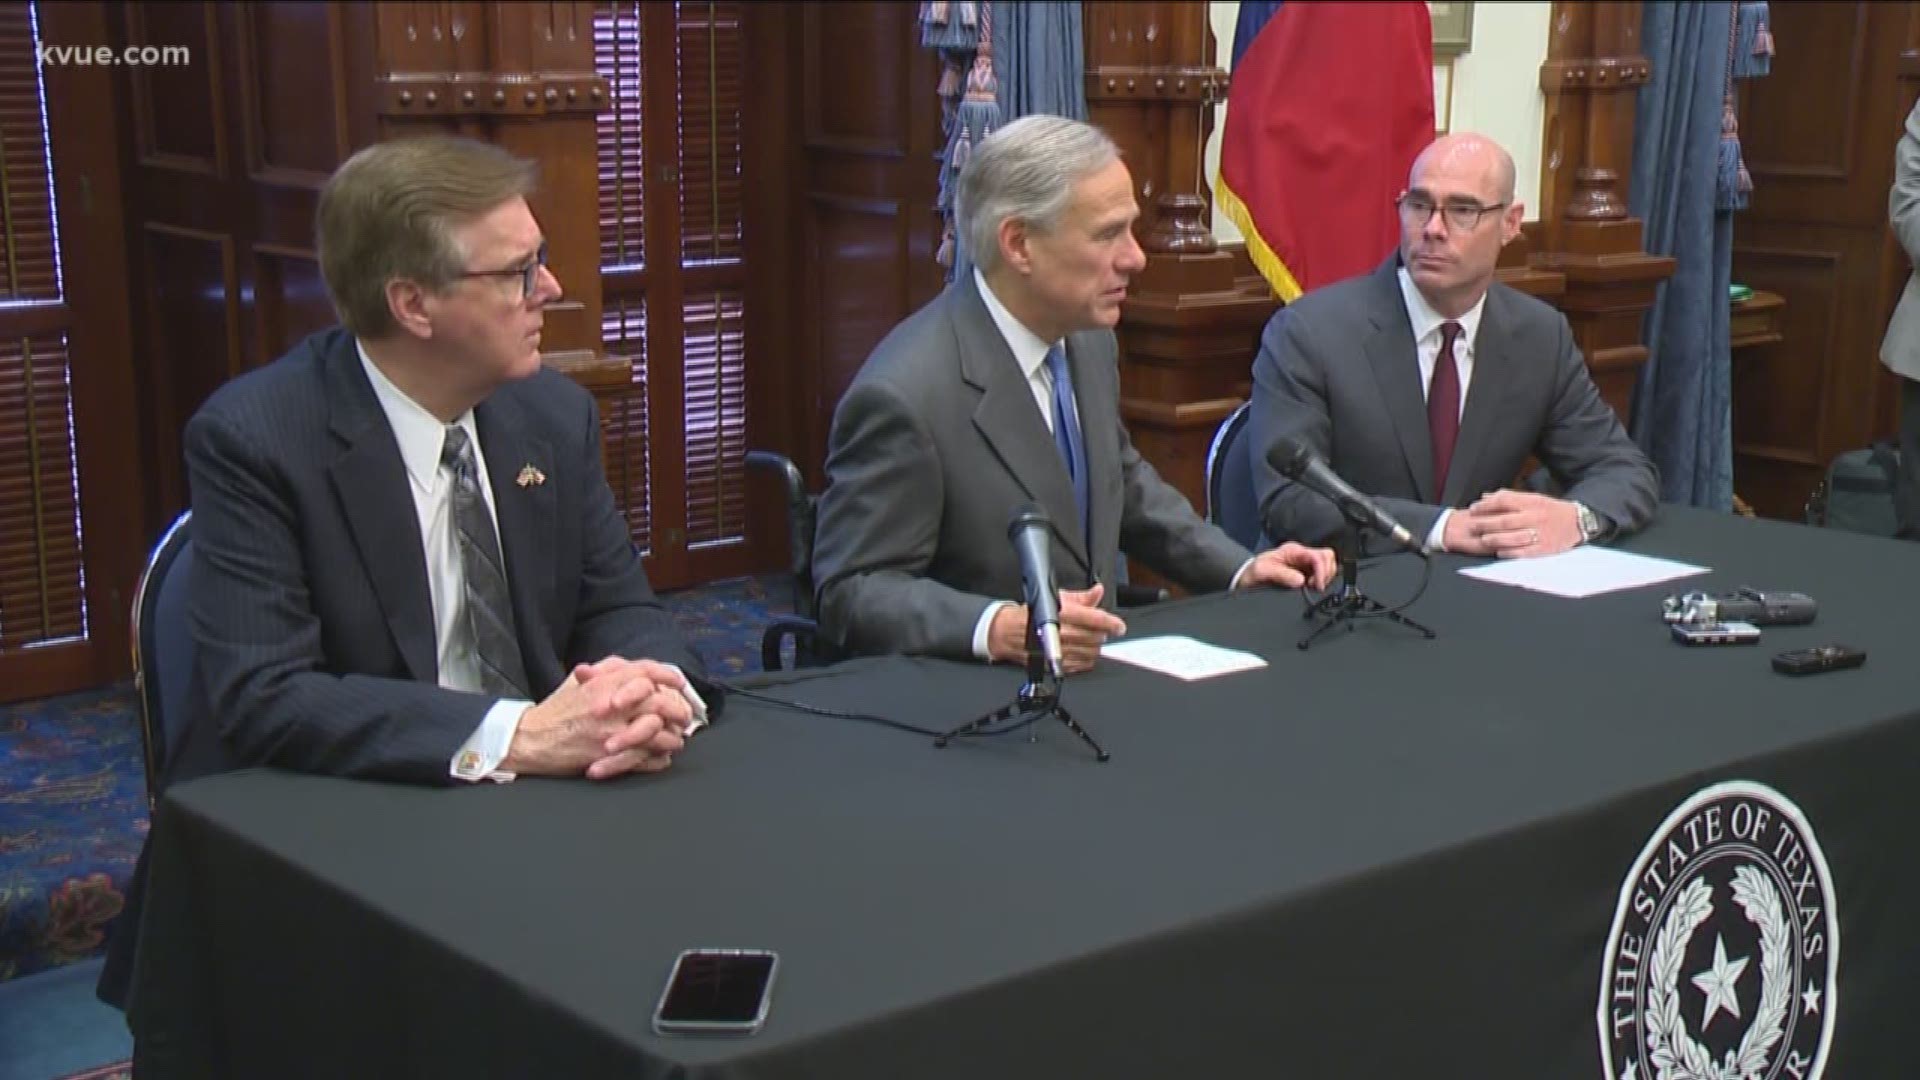 Texas leaders said their plan to reduce property taxes is moving forward.